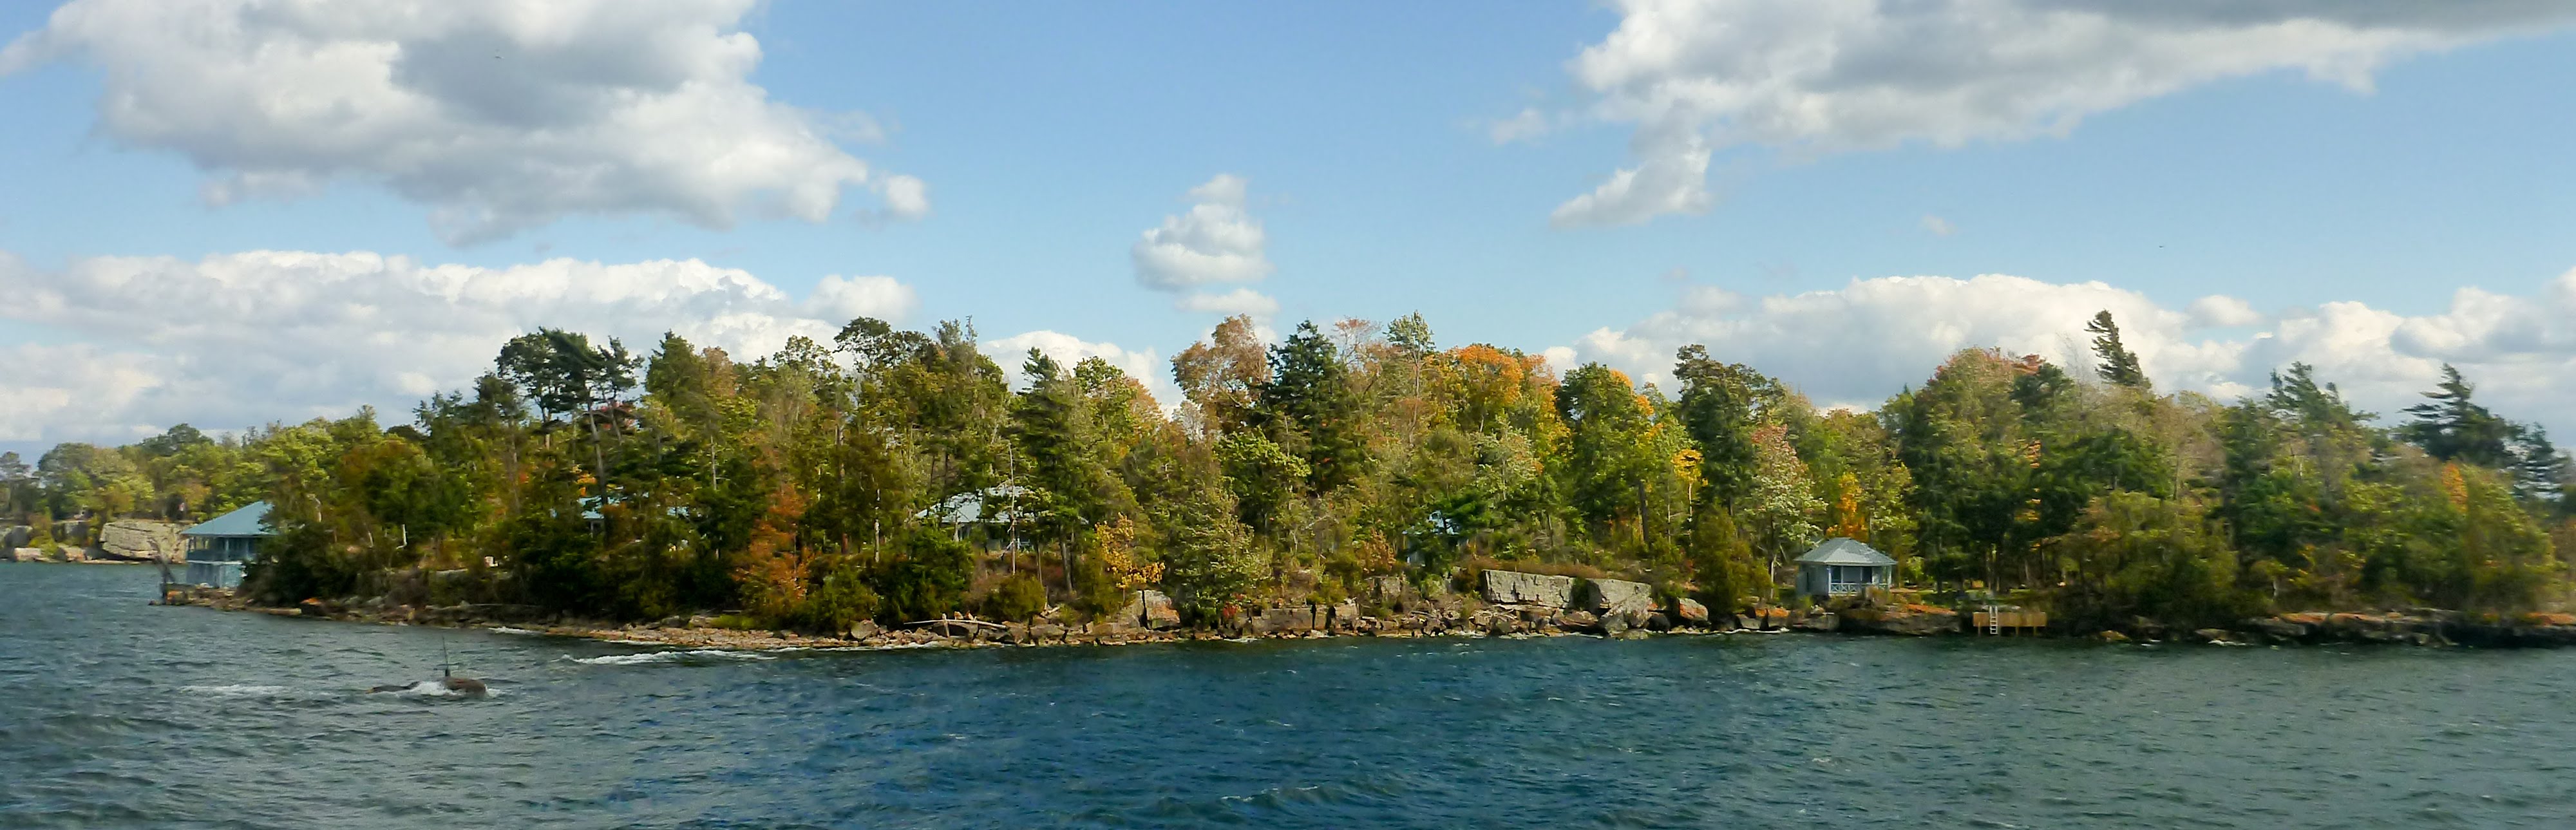 Islands in the St Lawrence